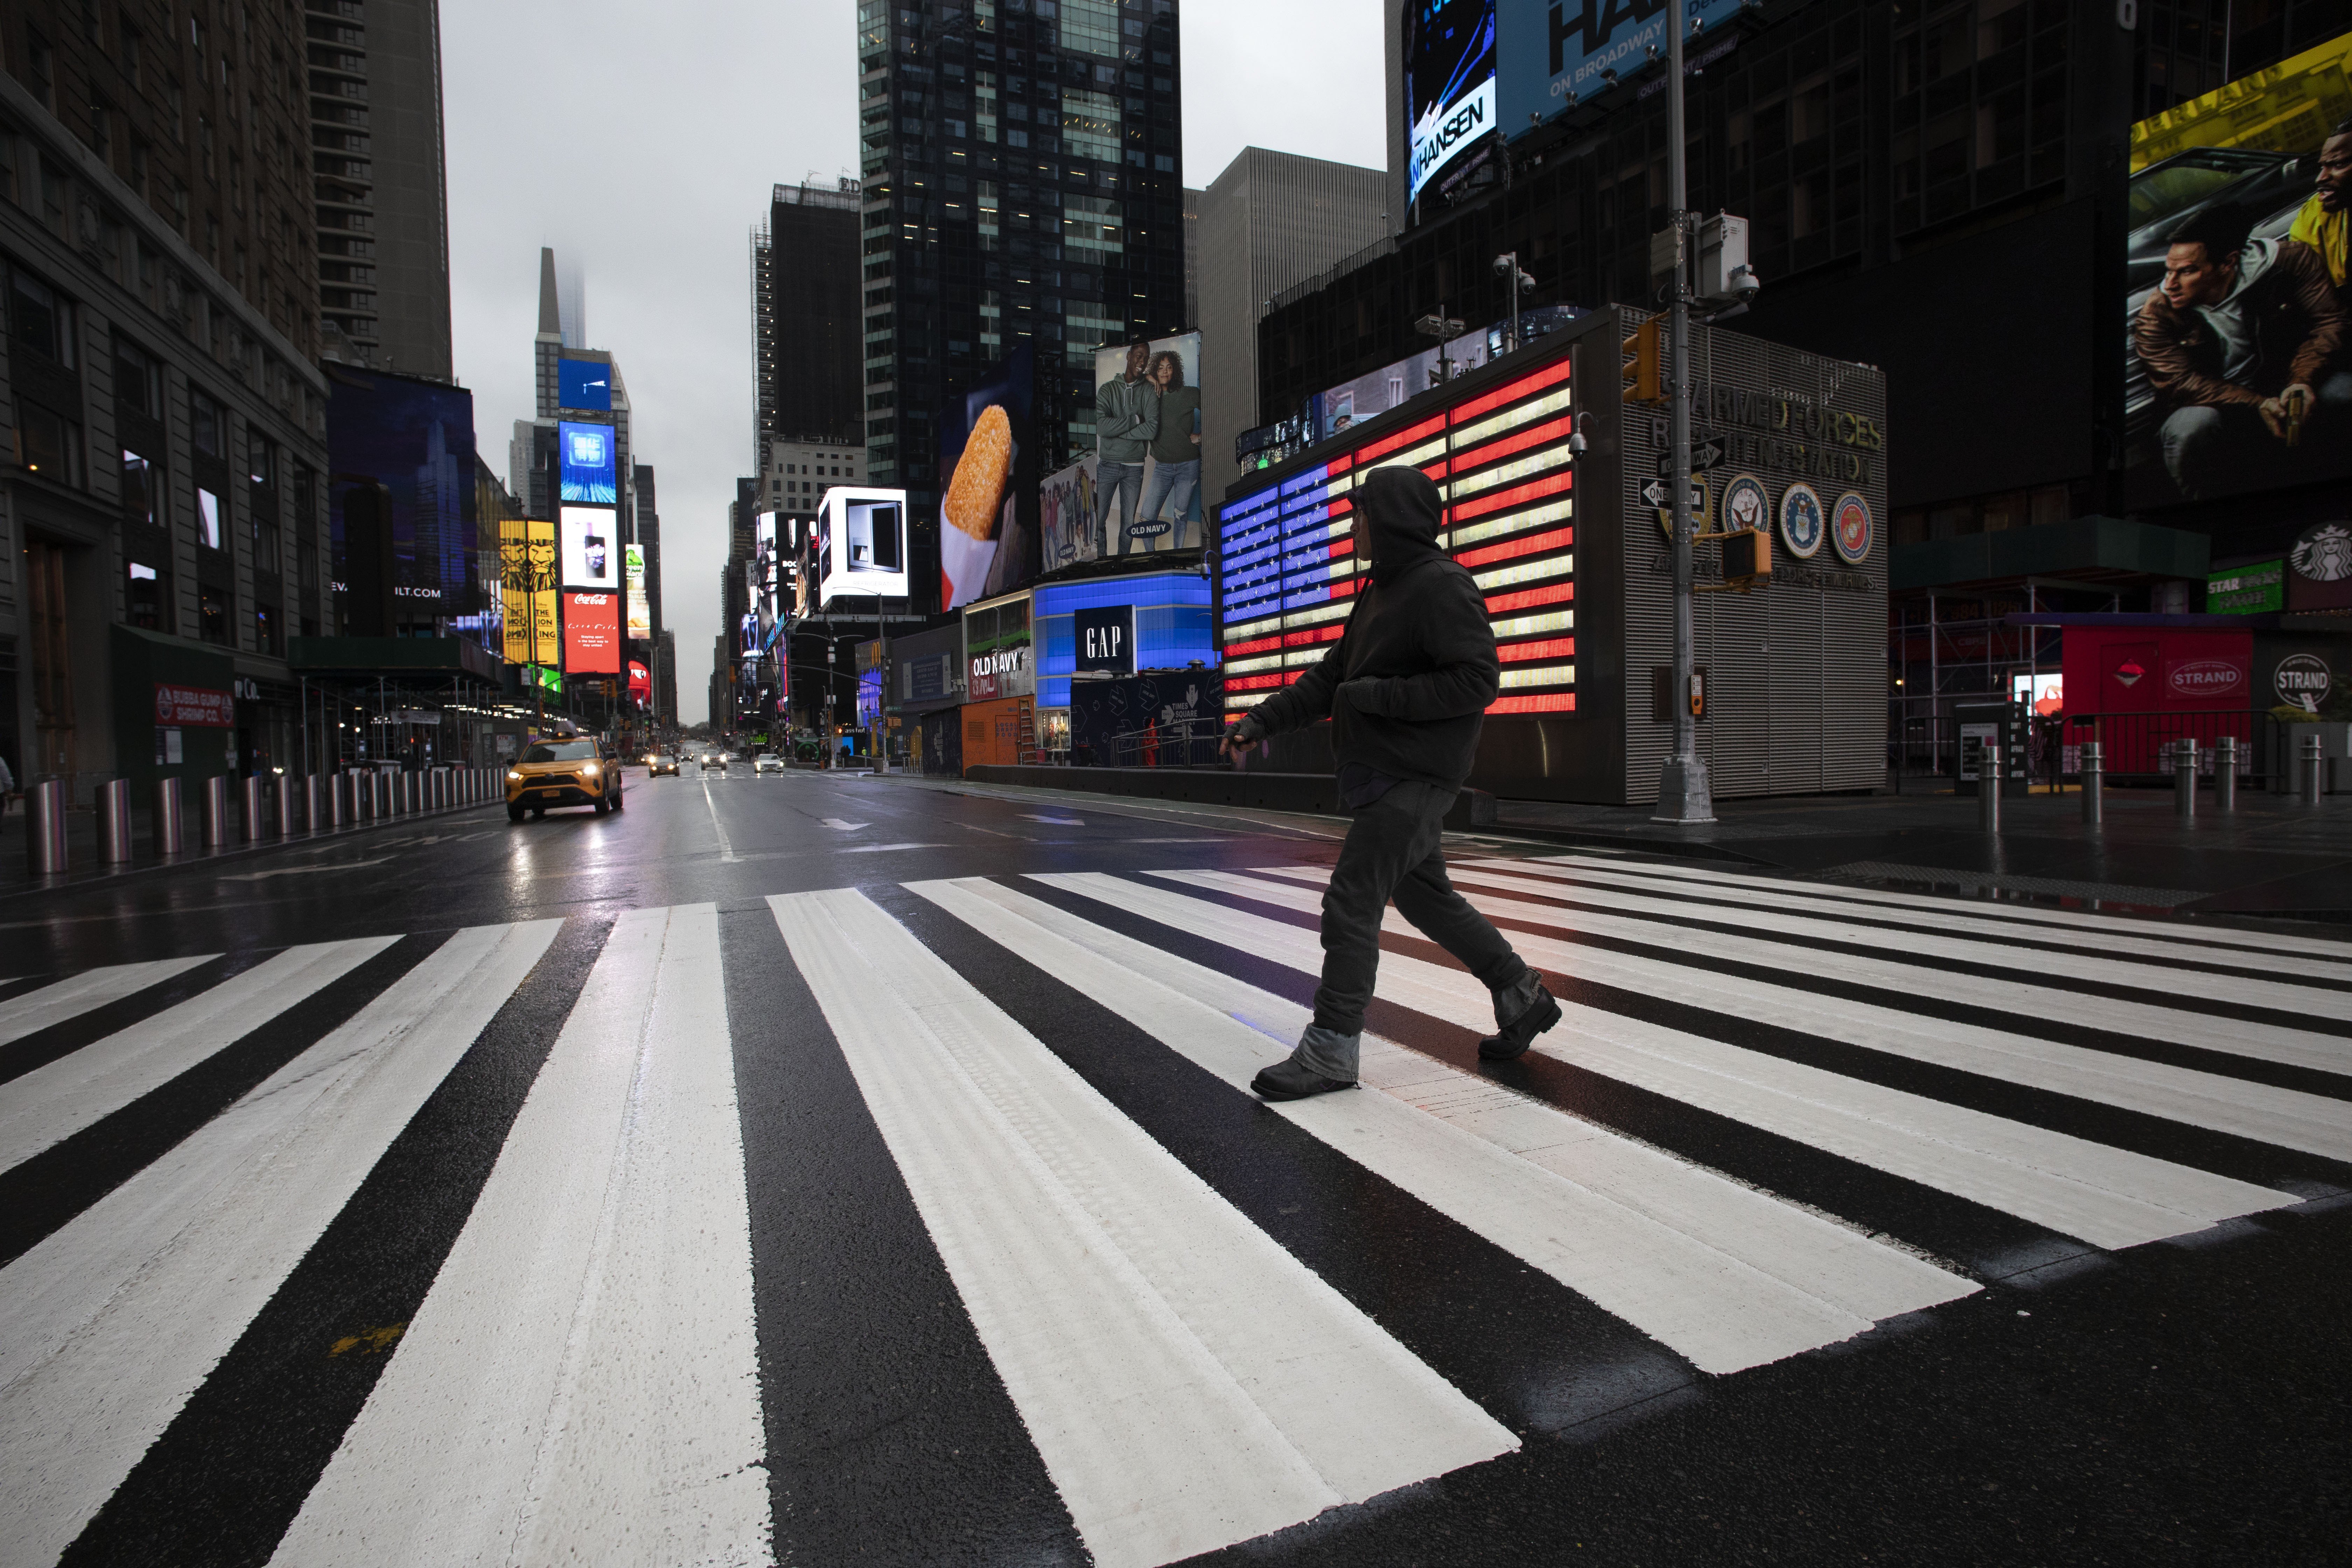 A man crosses the street in a nearly empty Times Square in New York, which is usually very crowded on a weekday morning, on March 23. New York City, which alone has over 10,000 cases of infection, is on the verge of running out of medical supplies. Photo: AP